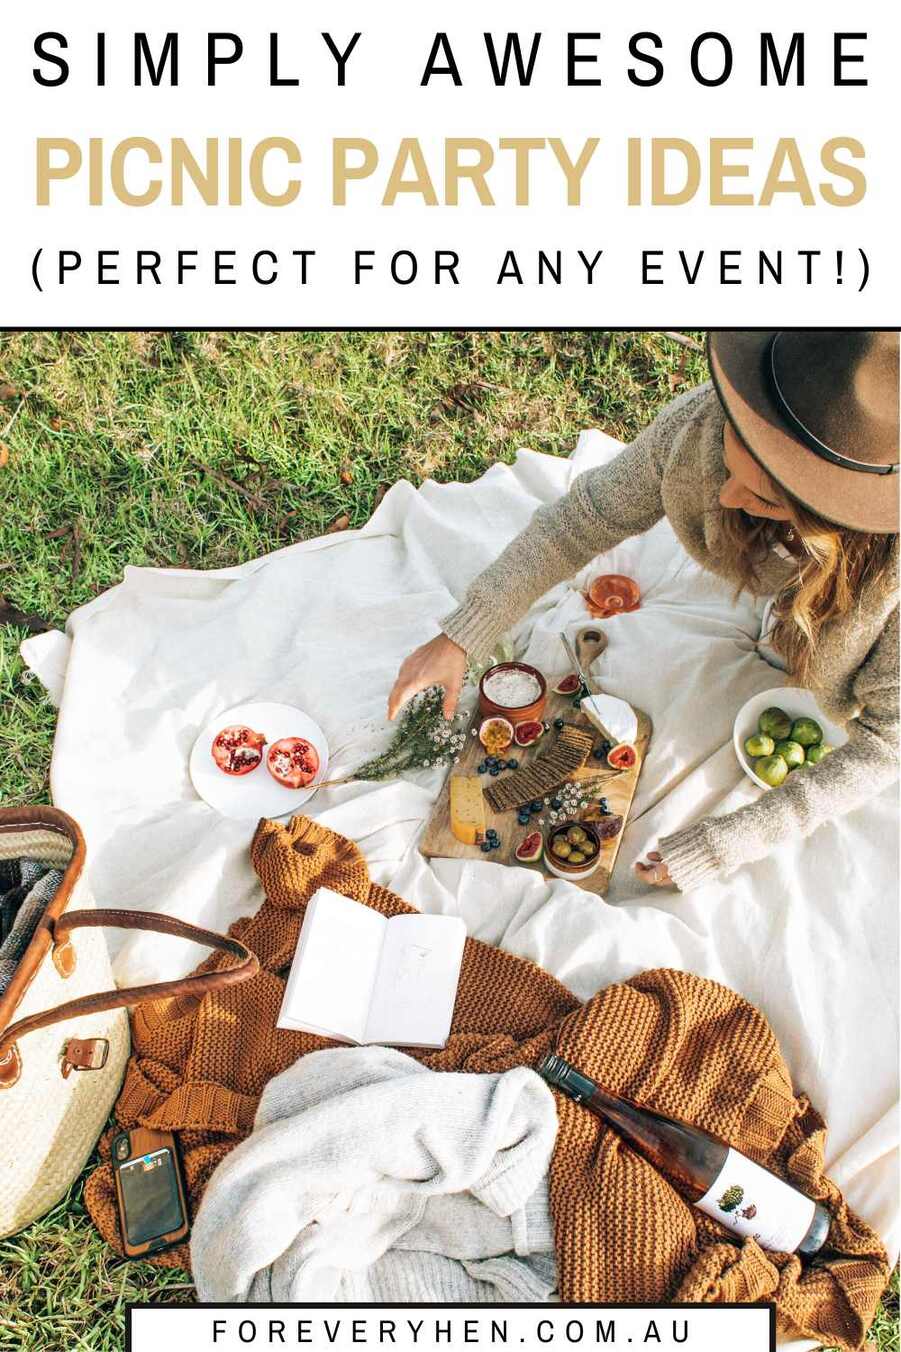 Image of a woman picnicking. Text overlay: Simply awesome picnic party ideas (perfect for any event!)